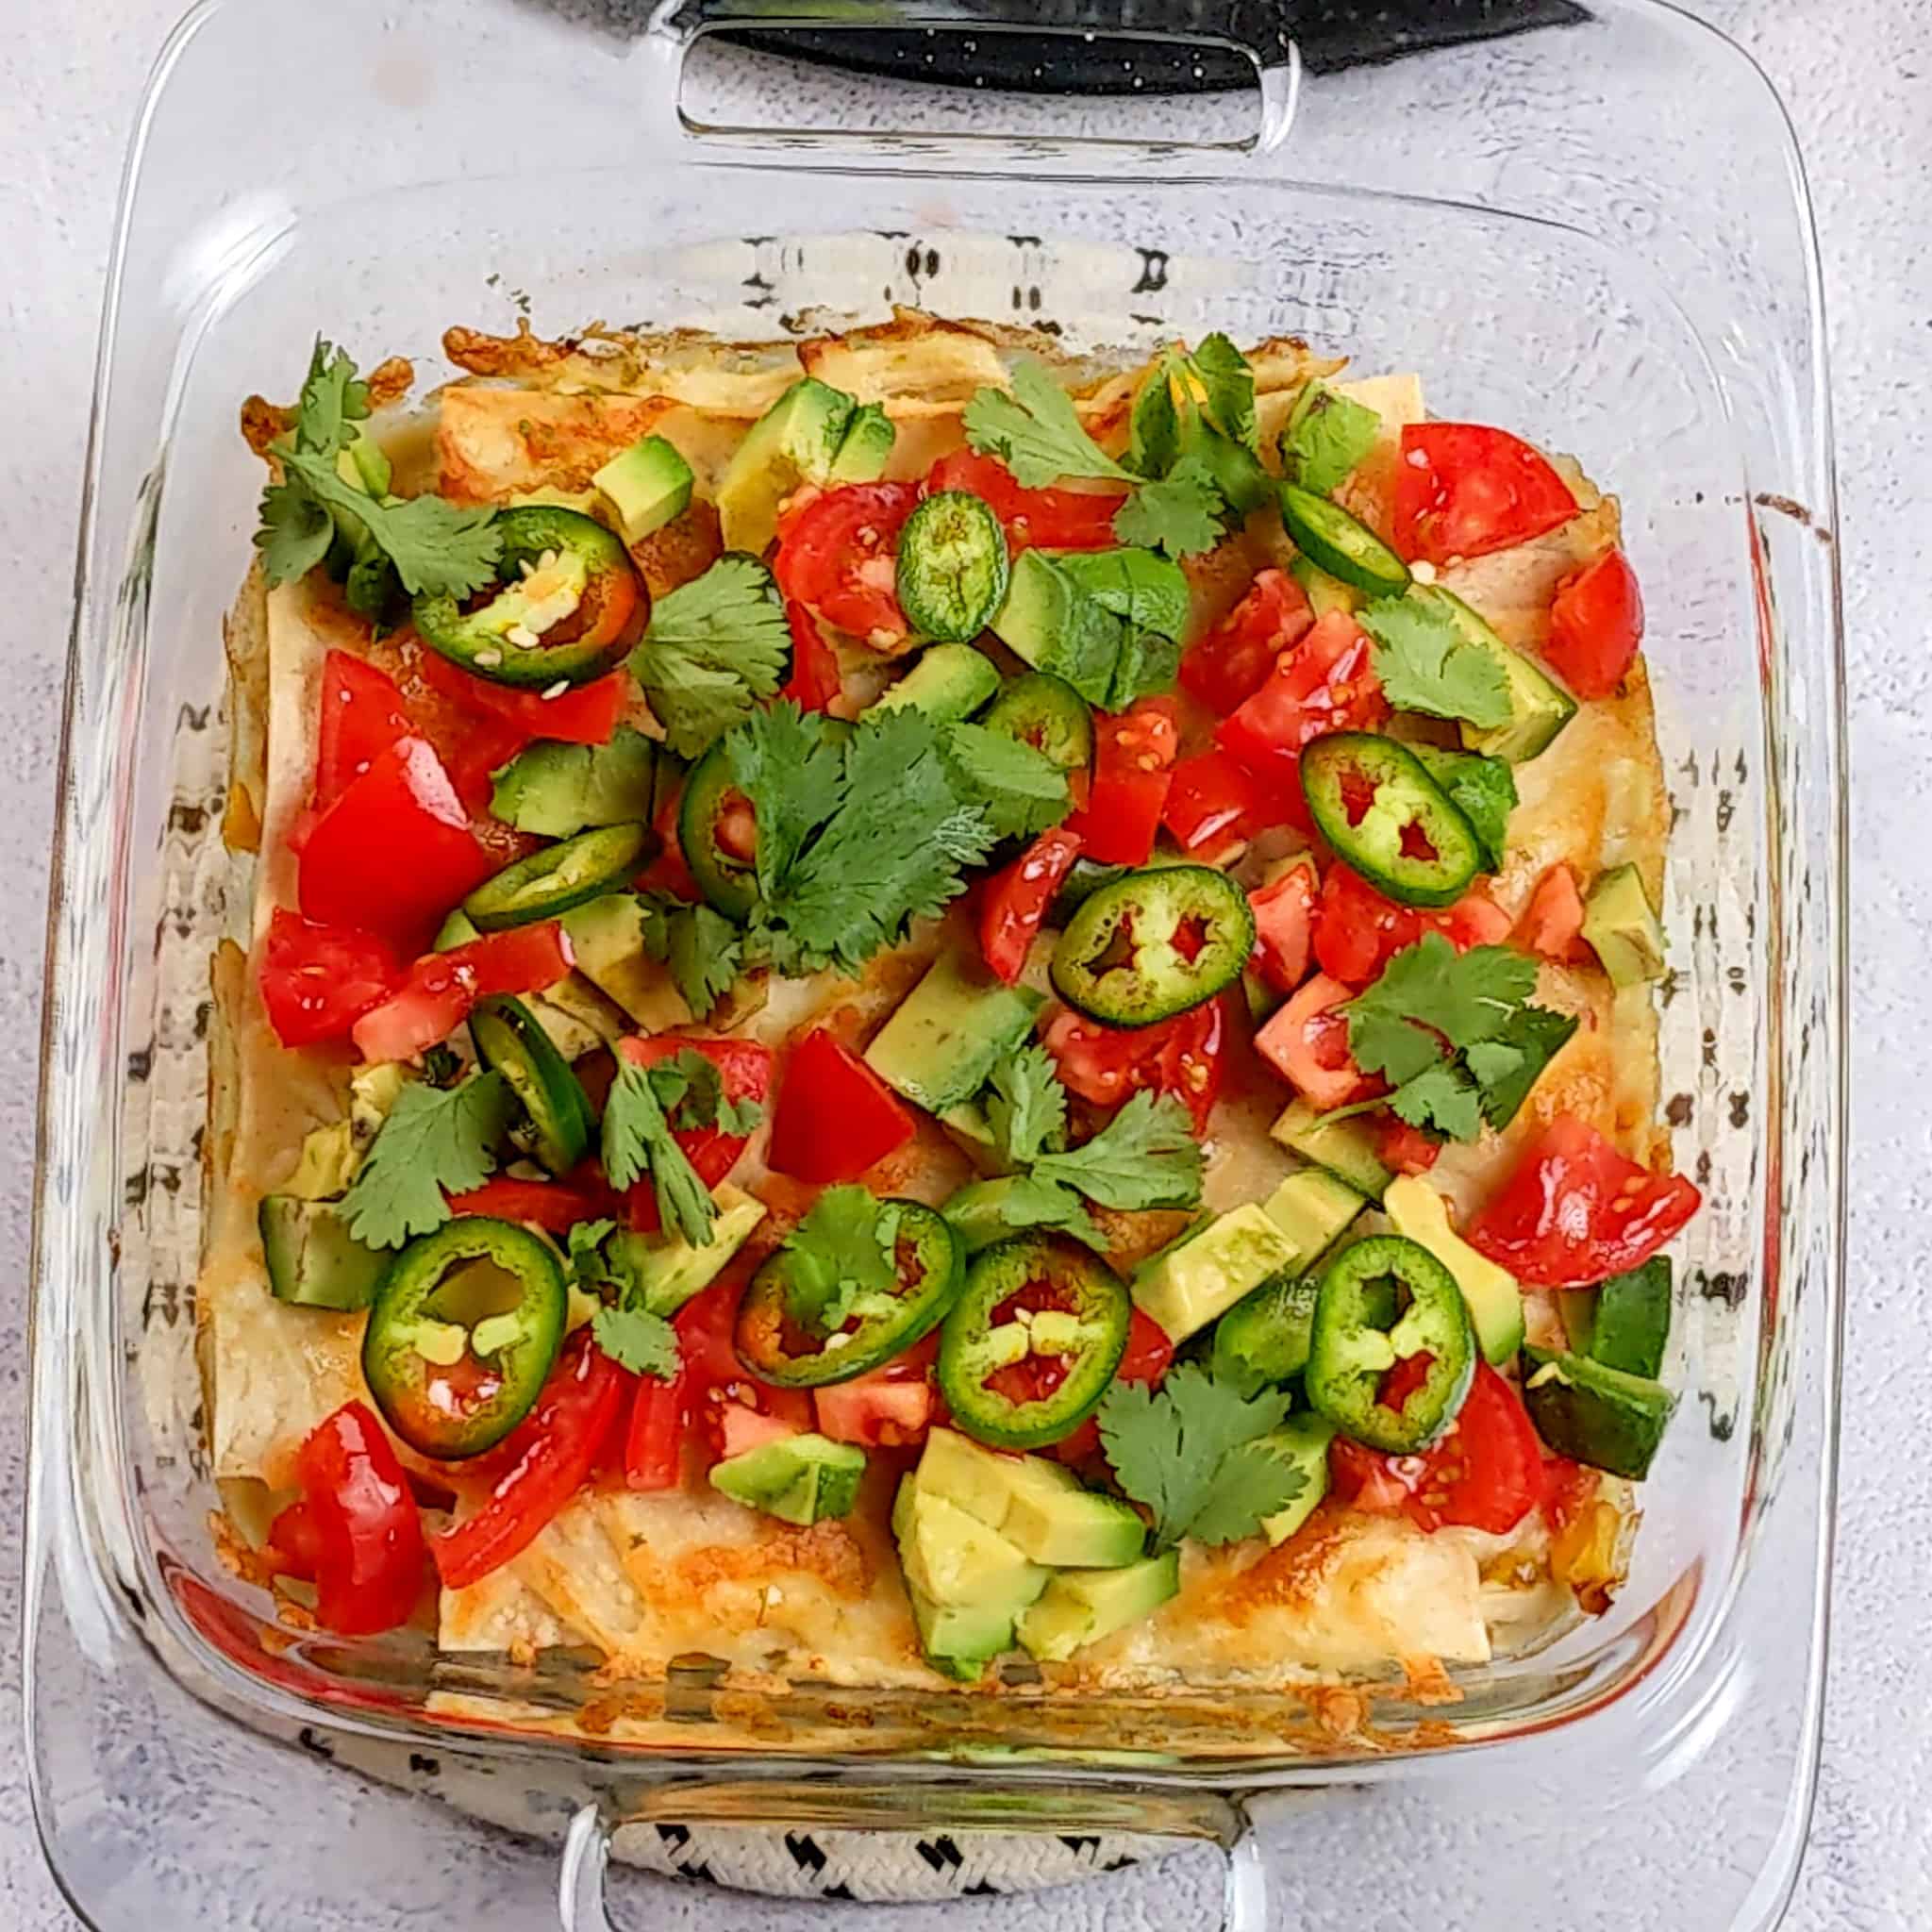 cilantro leaves, sliced jalapeno rings, diced tomatoes, and diced avocado pieces on top of the baked chicken tortilla casserole